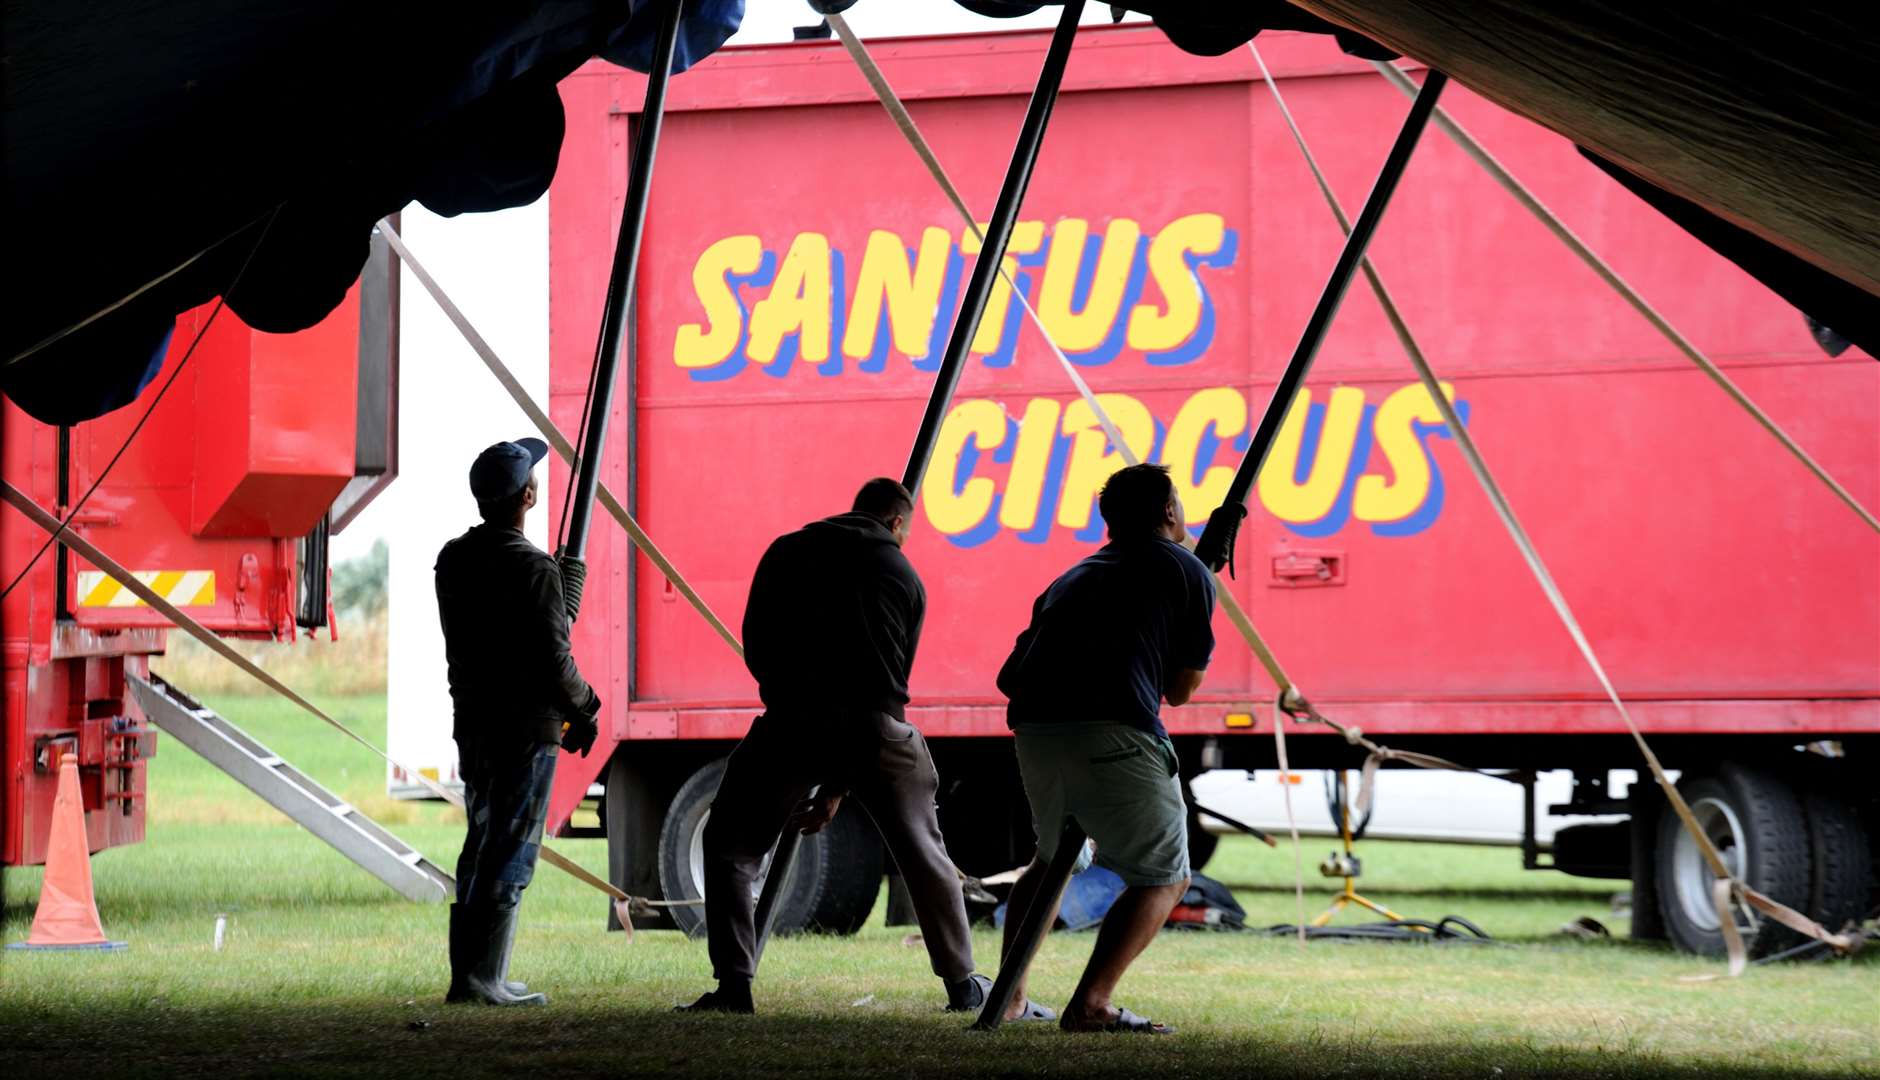 The Big Top will be pitched near the coast